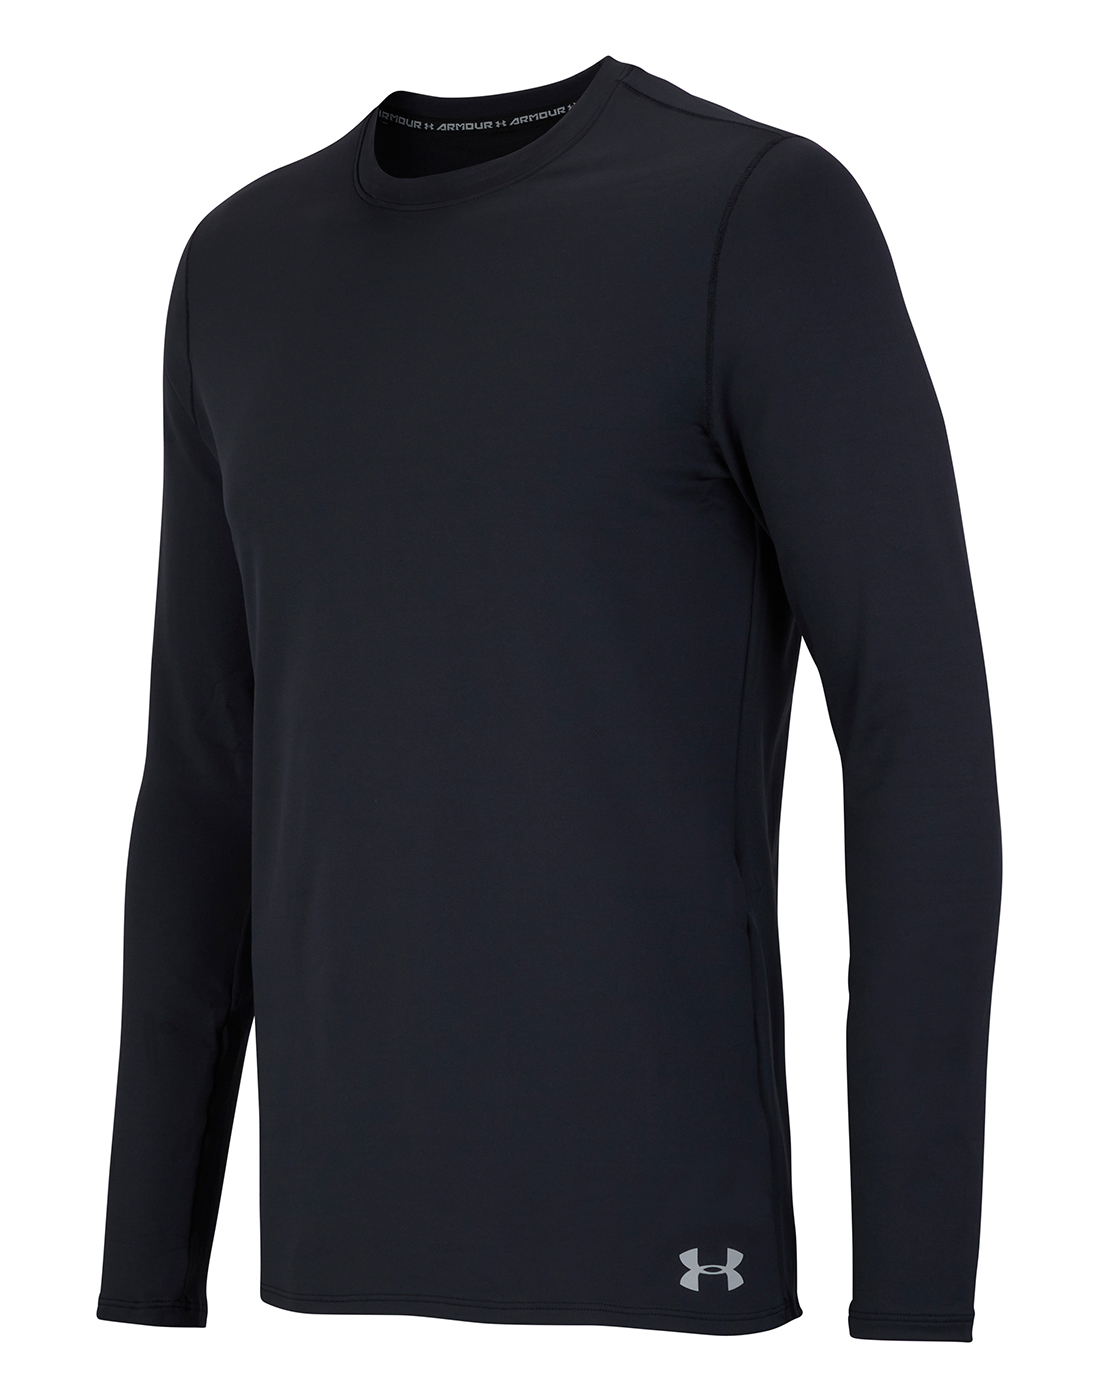 Under Armour Adult Cold Gear Armour Long Sleeve Top - Black | Life